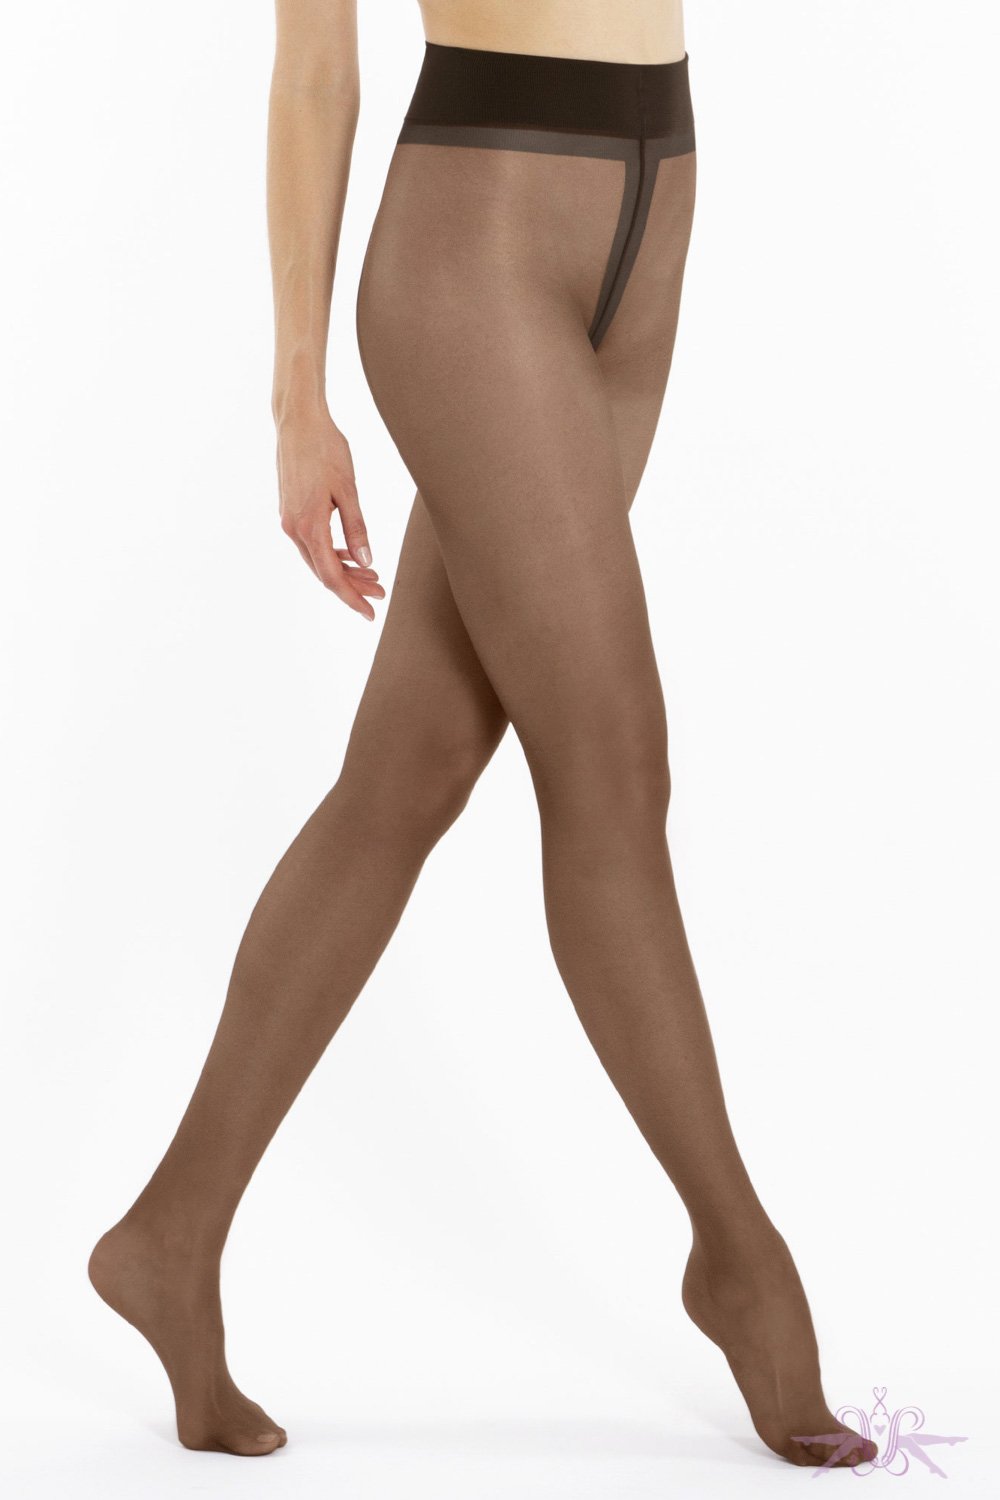 Le Bourget Perfect Chic 20 Denier Tights At The Hosiery